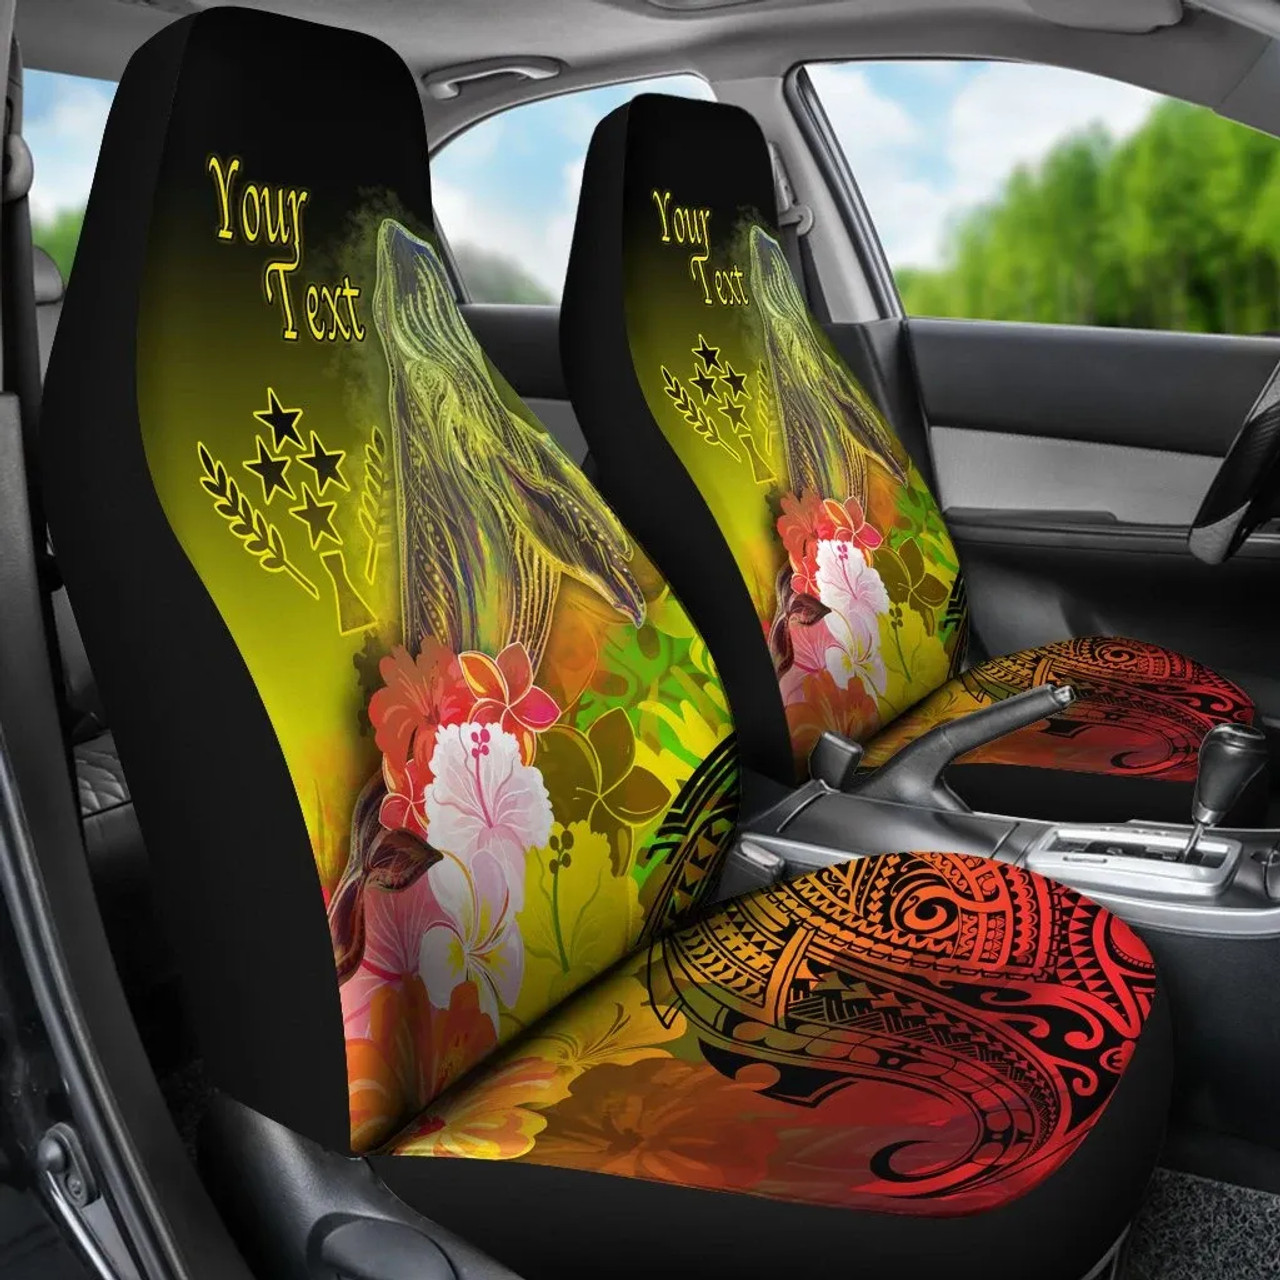 Kosrae Custom Personalised Car Seat Covers - Humpback Whale with Tropical Flowers (Yellow)